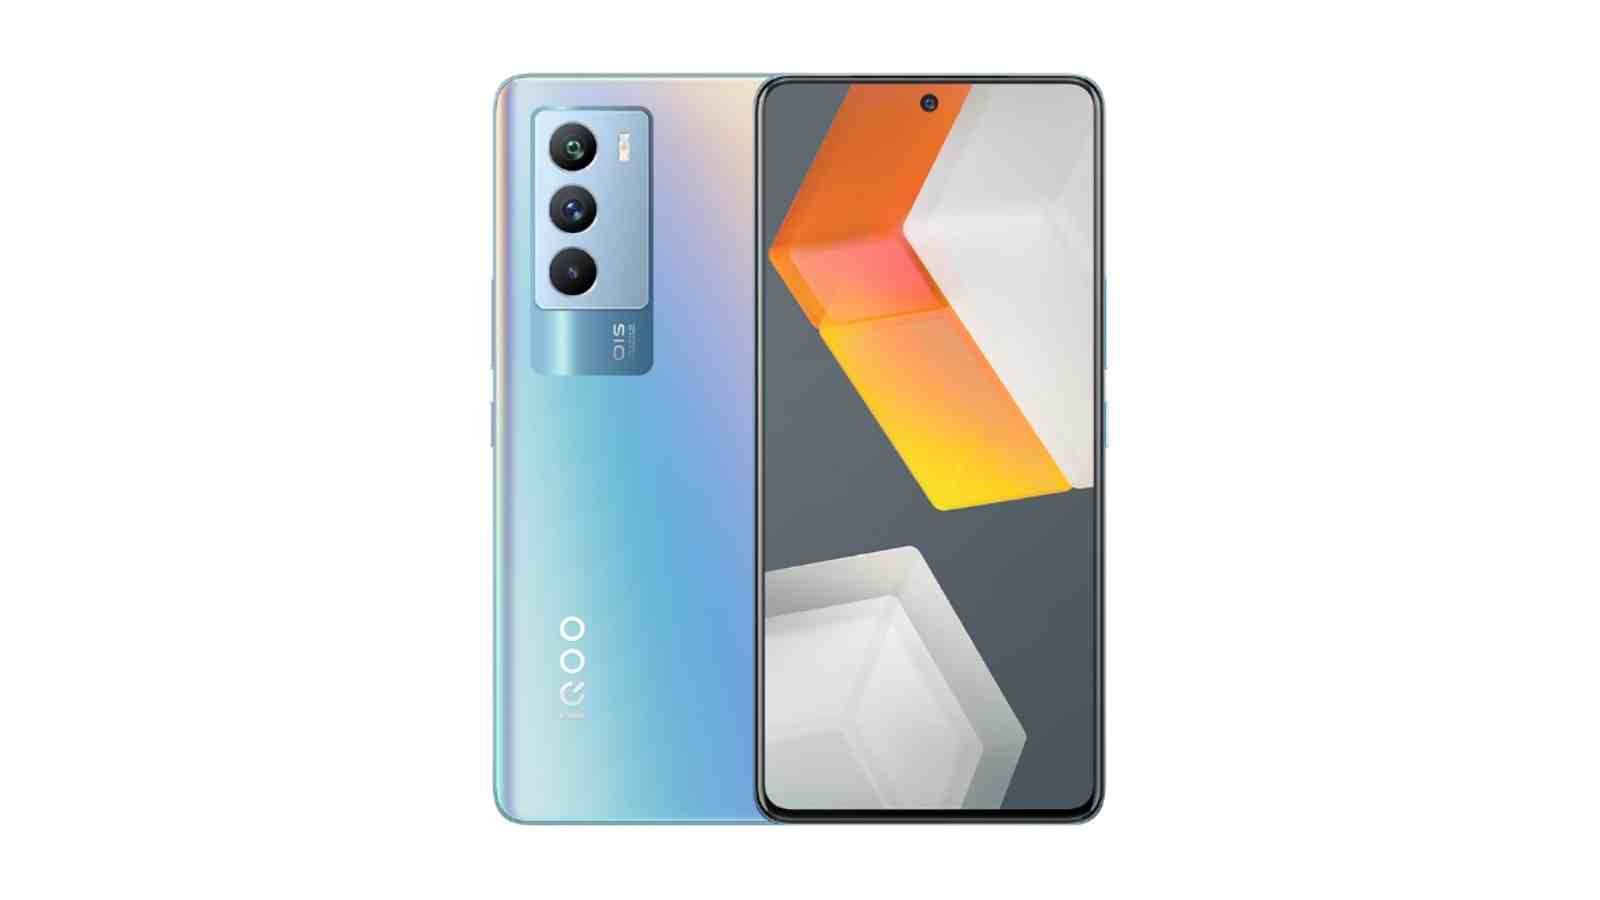 iQOO Neo 5S with Snapdragon 888, 120Hz AMOLED display launched: Price, Specifications